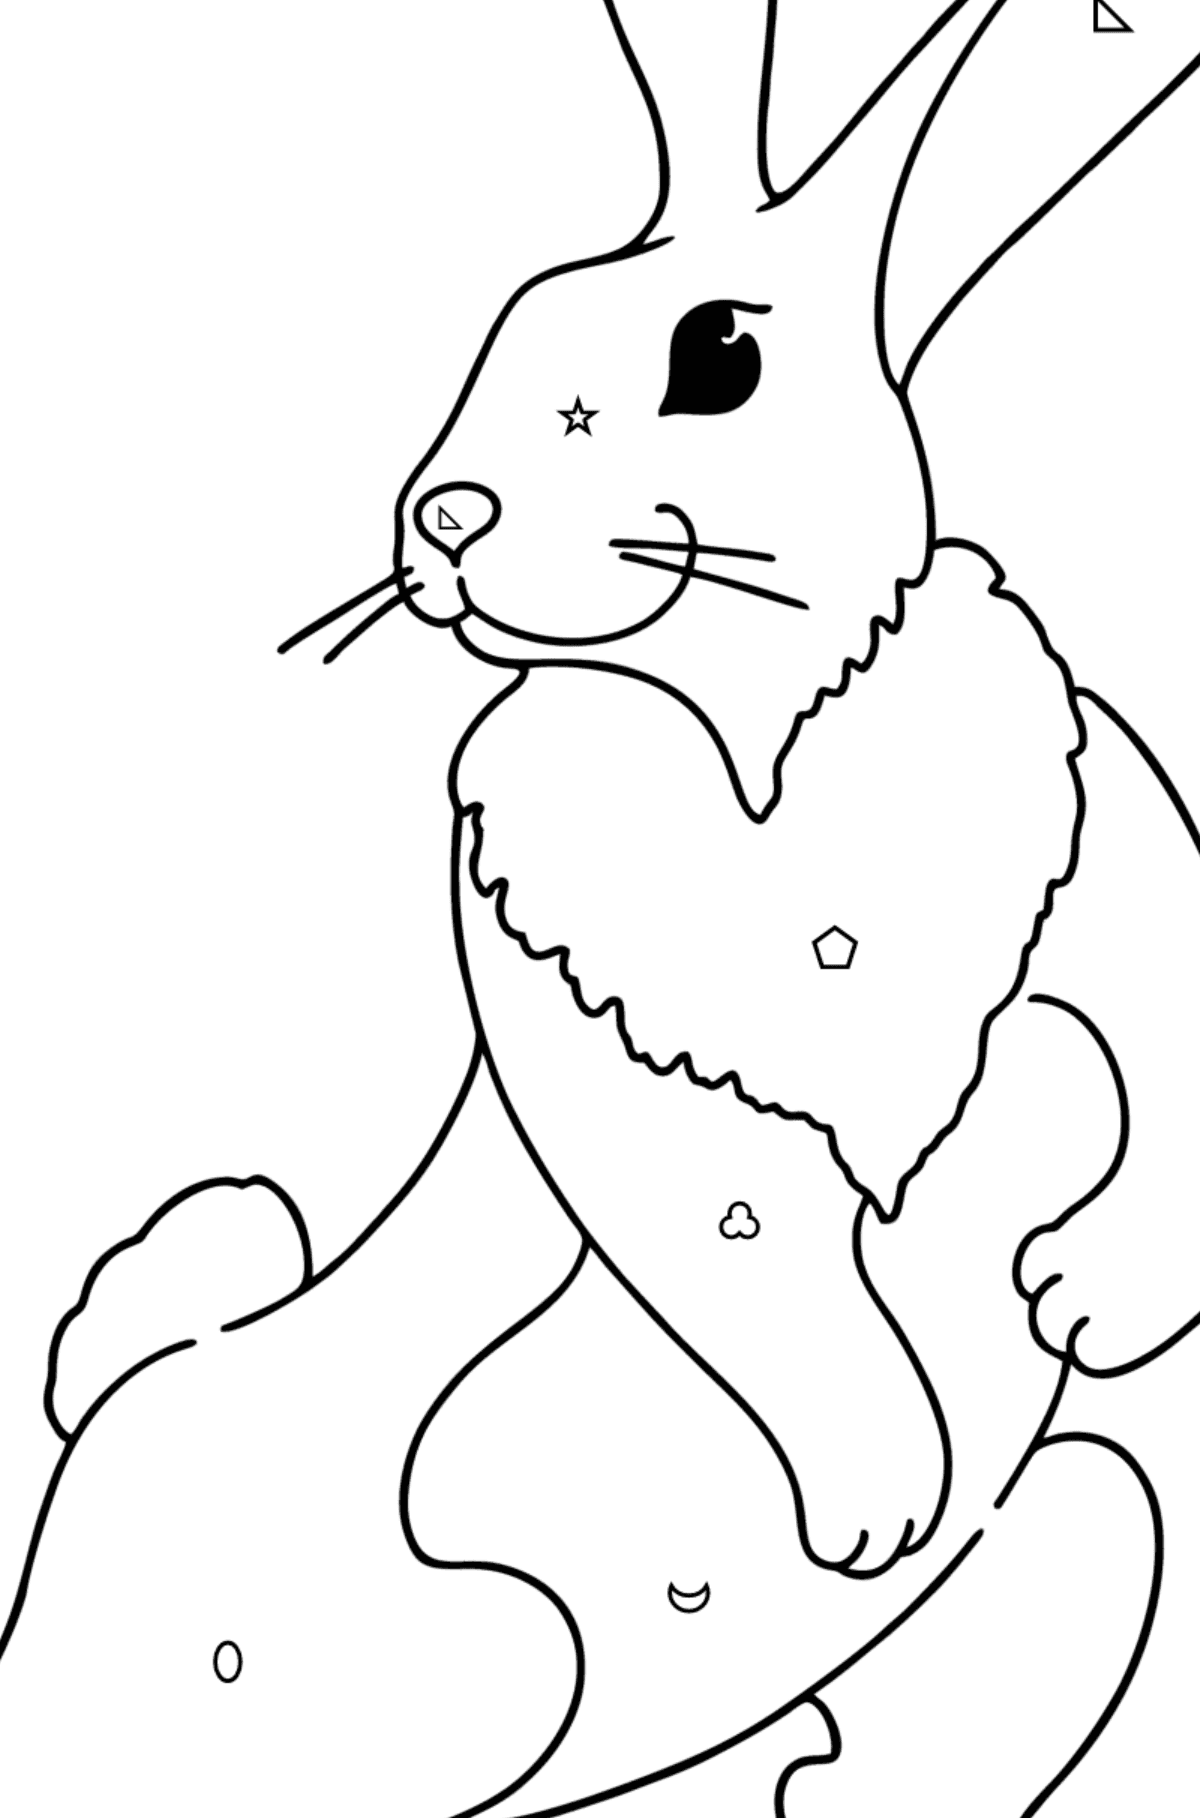 Playful Bunny coloring page - Coloring by Geometric Shapes for Kids